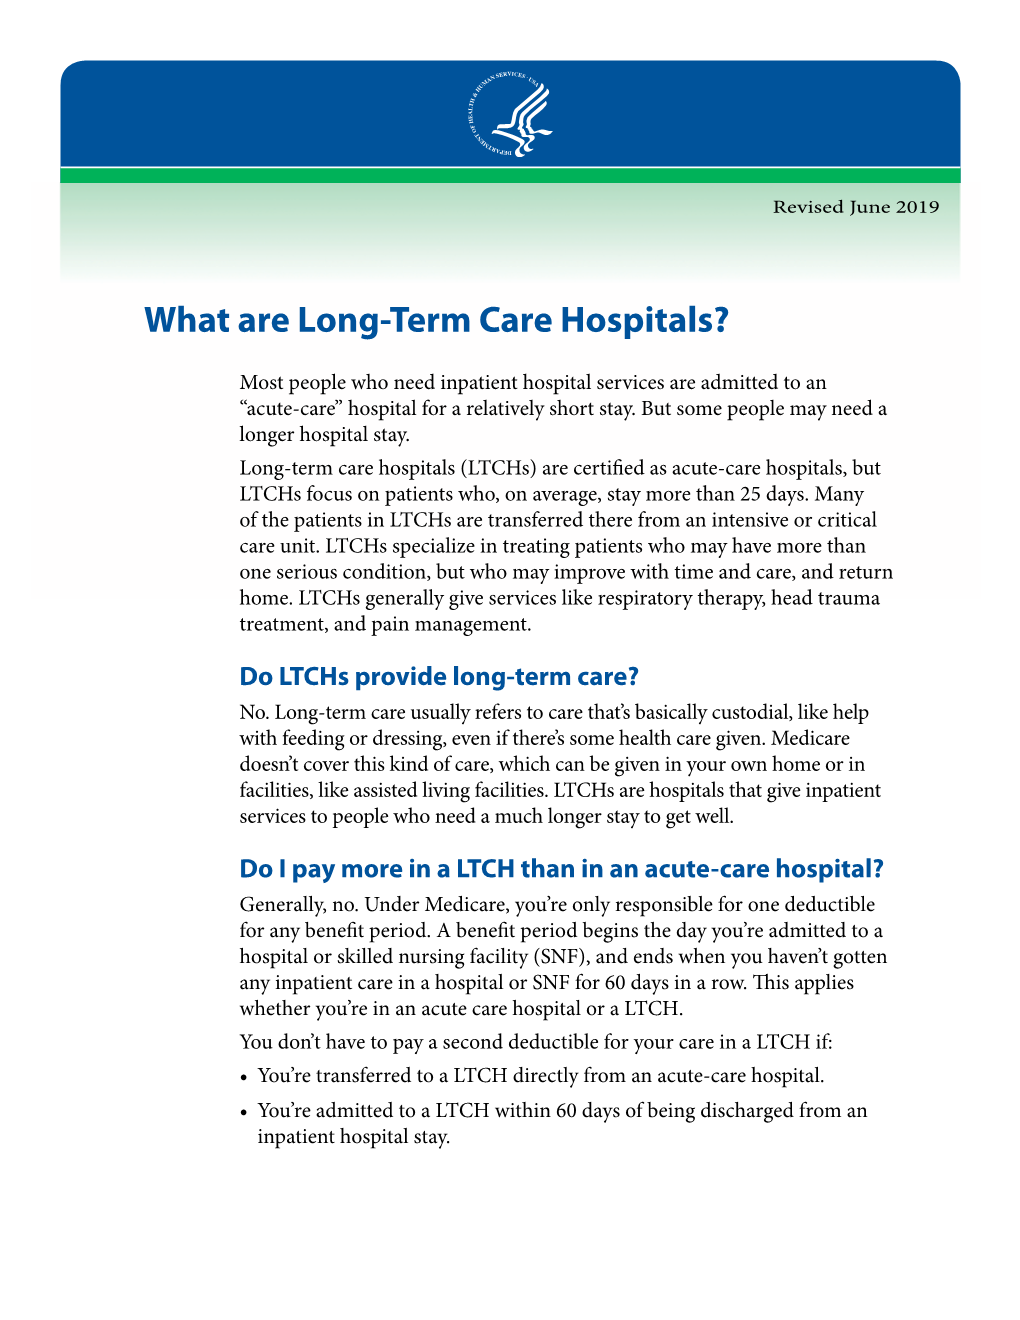 What Are Long-Term Care Hospitals?